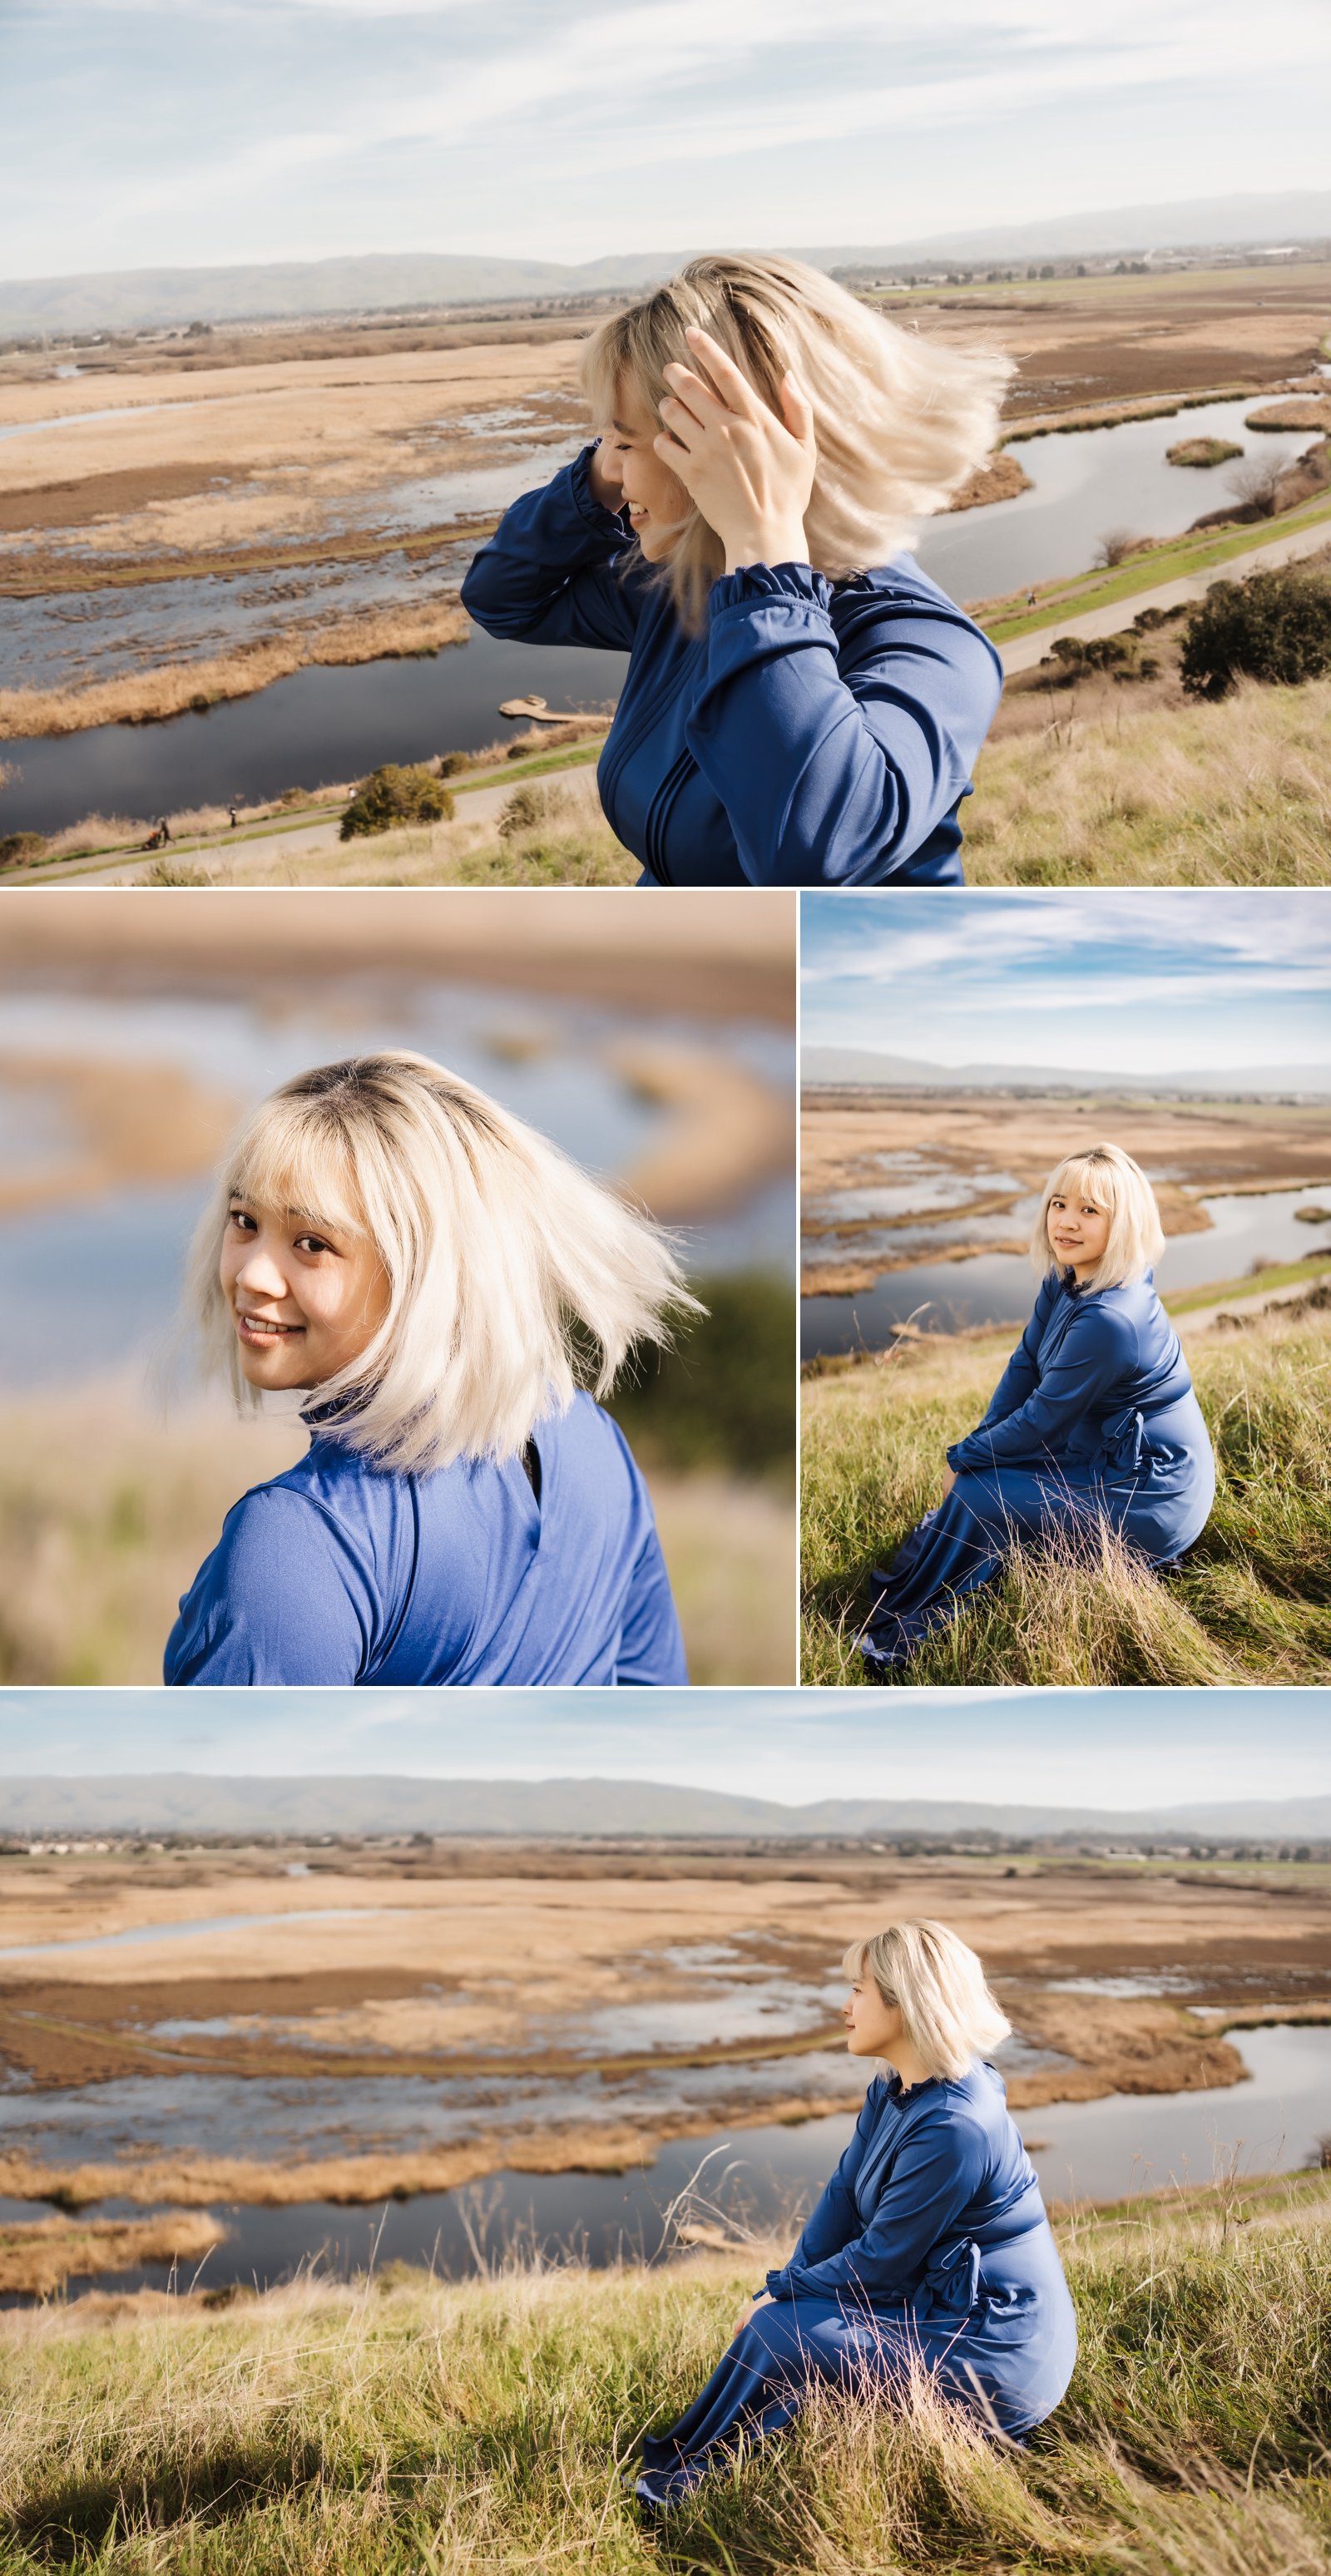 howl's moving castle sophie cosplay photoshoot bay area cosplay photographer 15.jpg